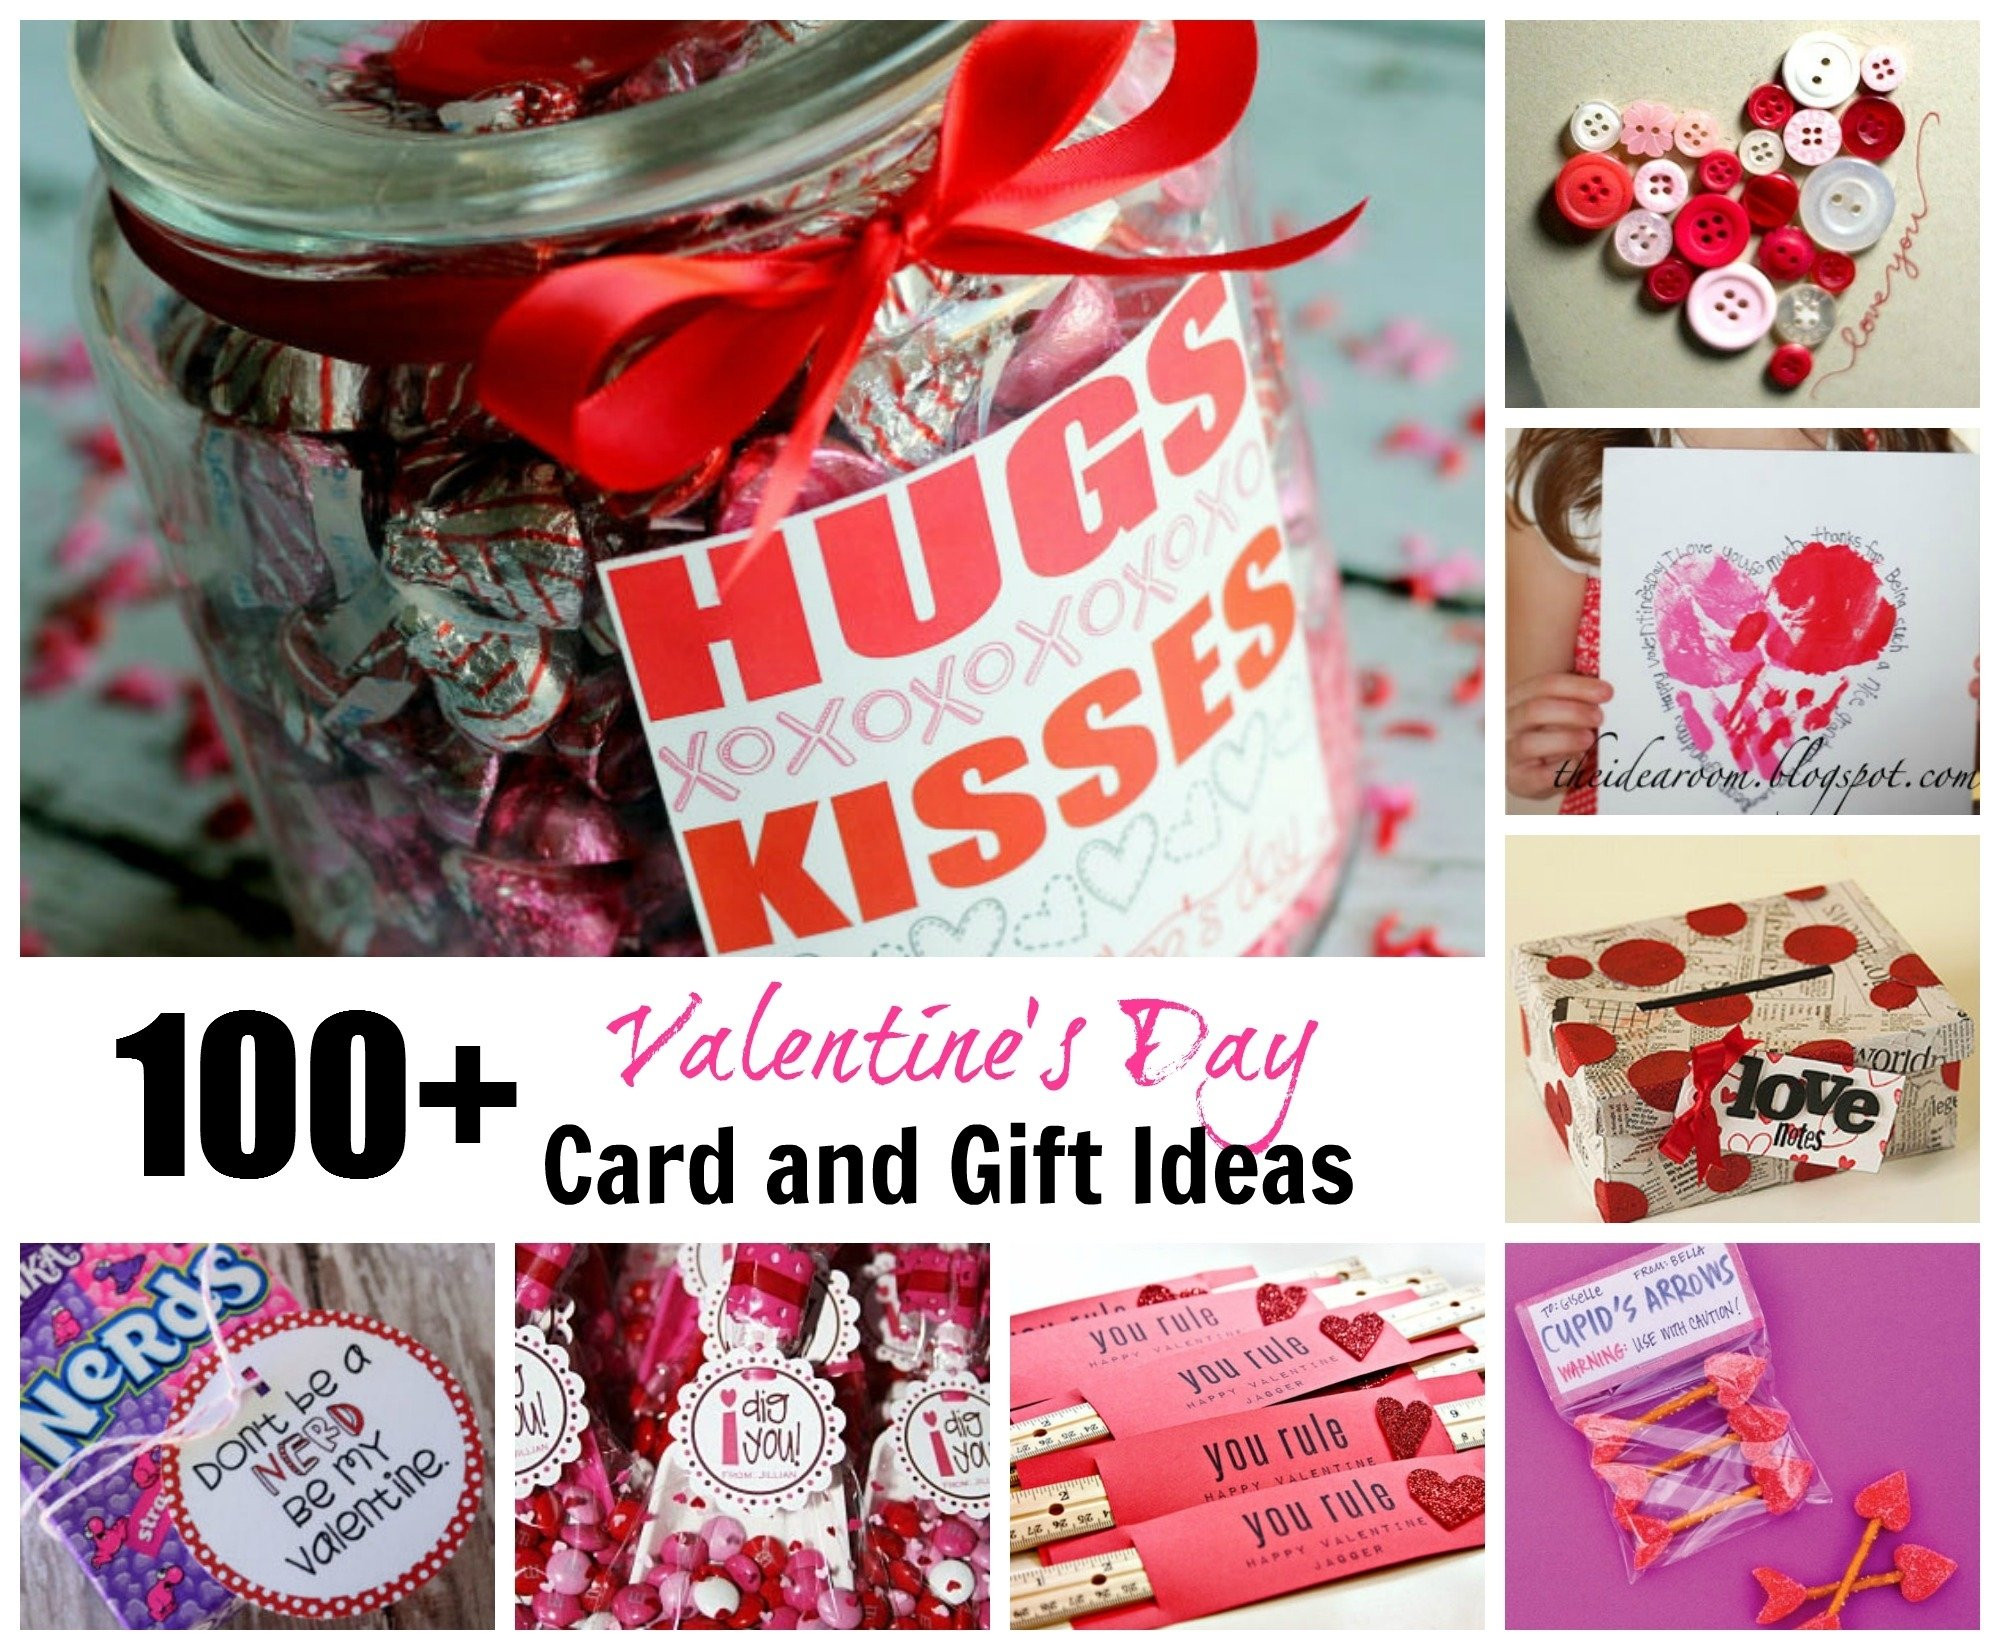 Valentines Gift Ideas Diy
 10 Lovable Homemade Valentines Ideas For Him 2020